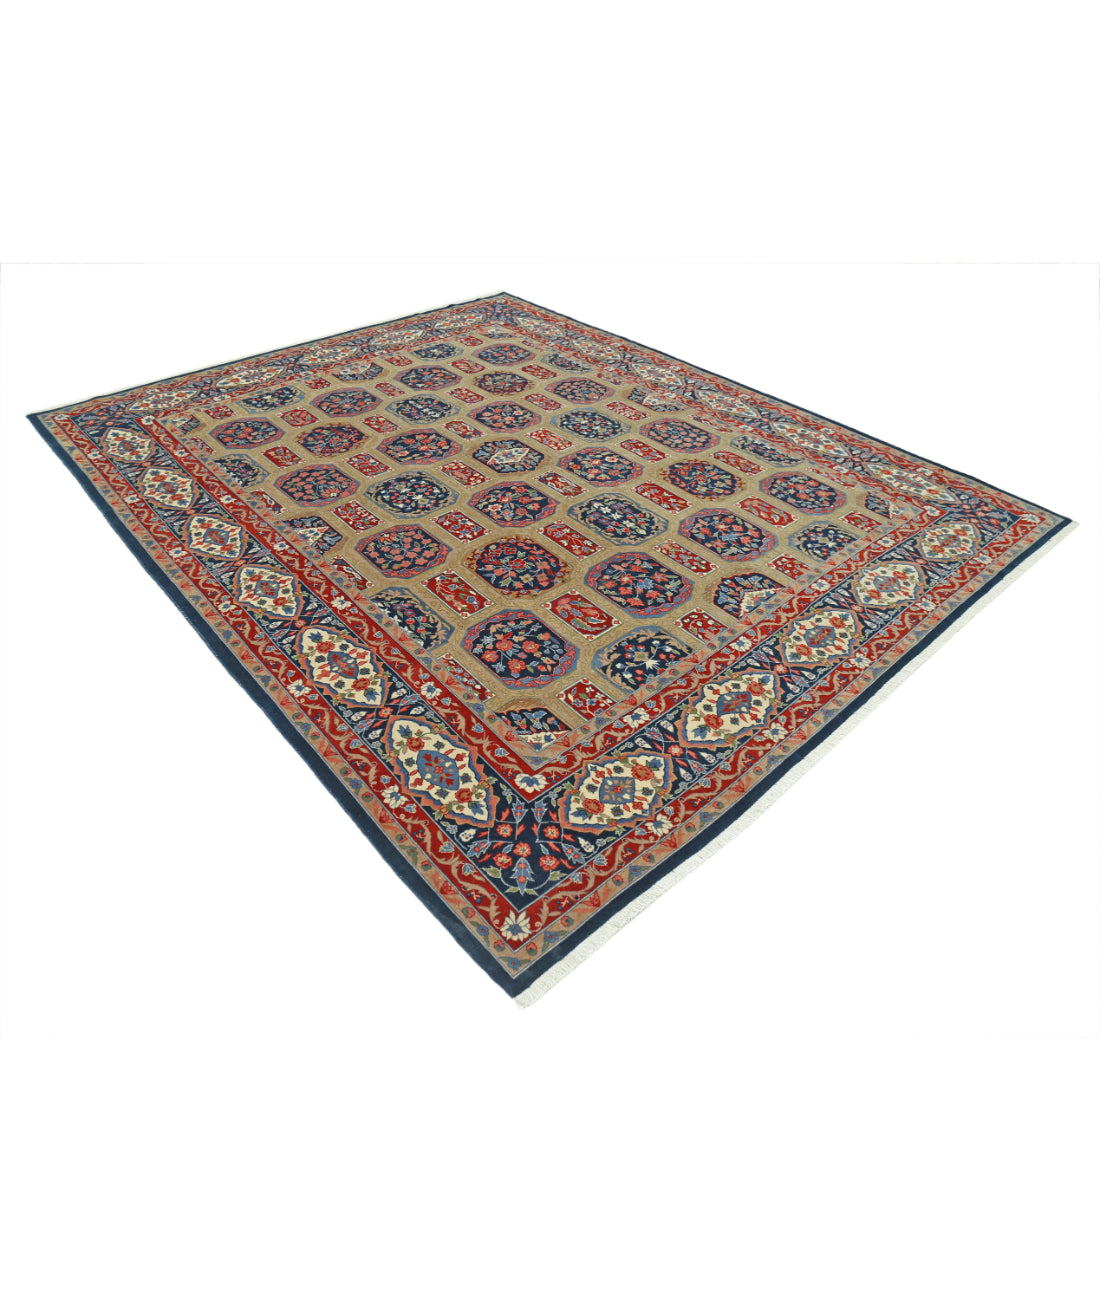 Heritage 7' 11" X 9' 9" Hand-Knotted Wool Rug 7' 11" X 9' 9" (241 X 297) / Beige / Blue